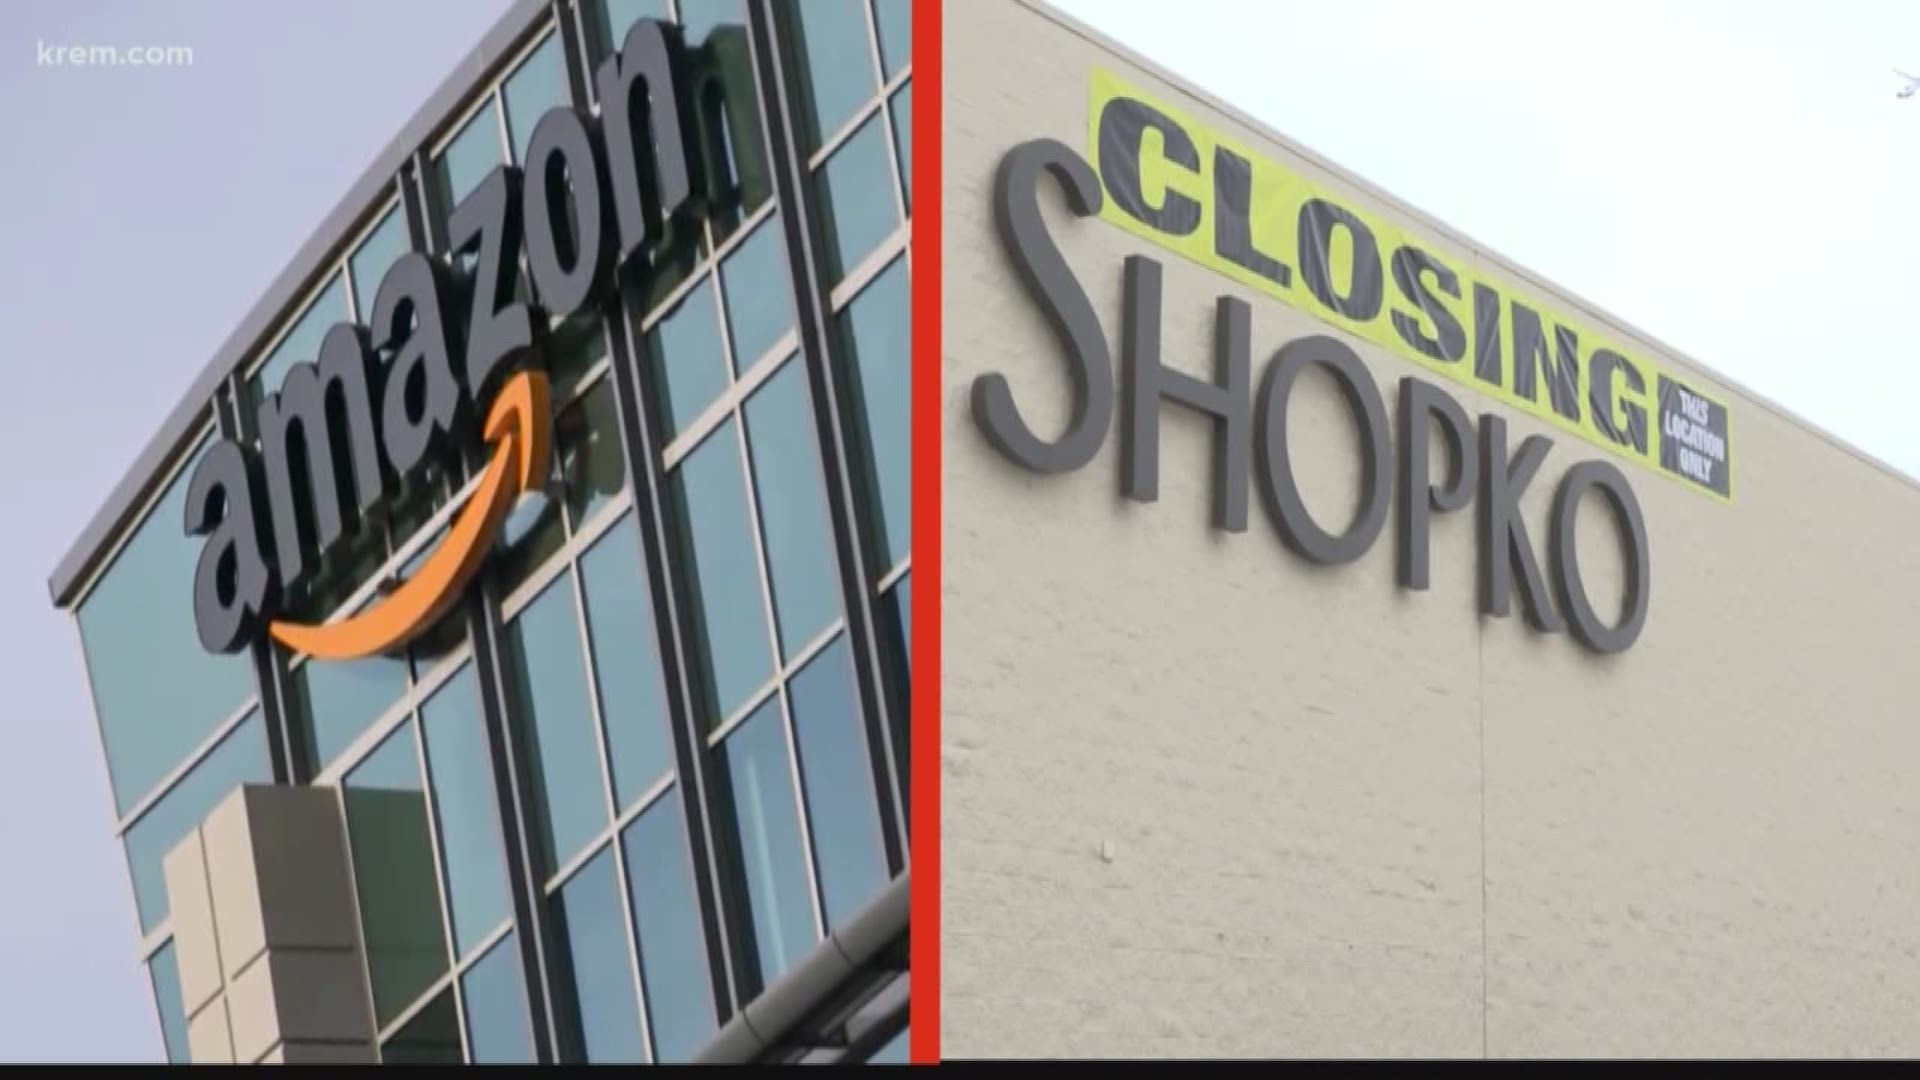 Just yesterday... Payless Shoe Source announced it will be closing *all* of its stores around America.
That announcement... only the latest in a series of similar closures of chain retailers.